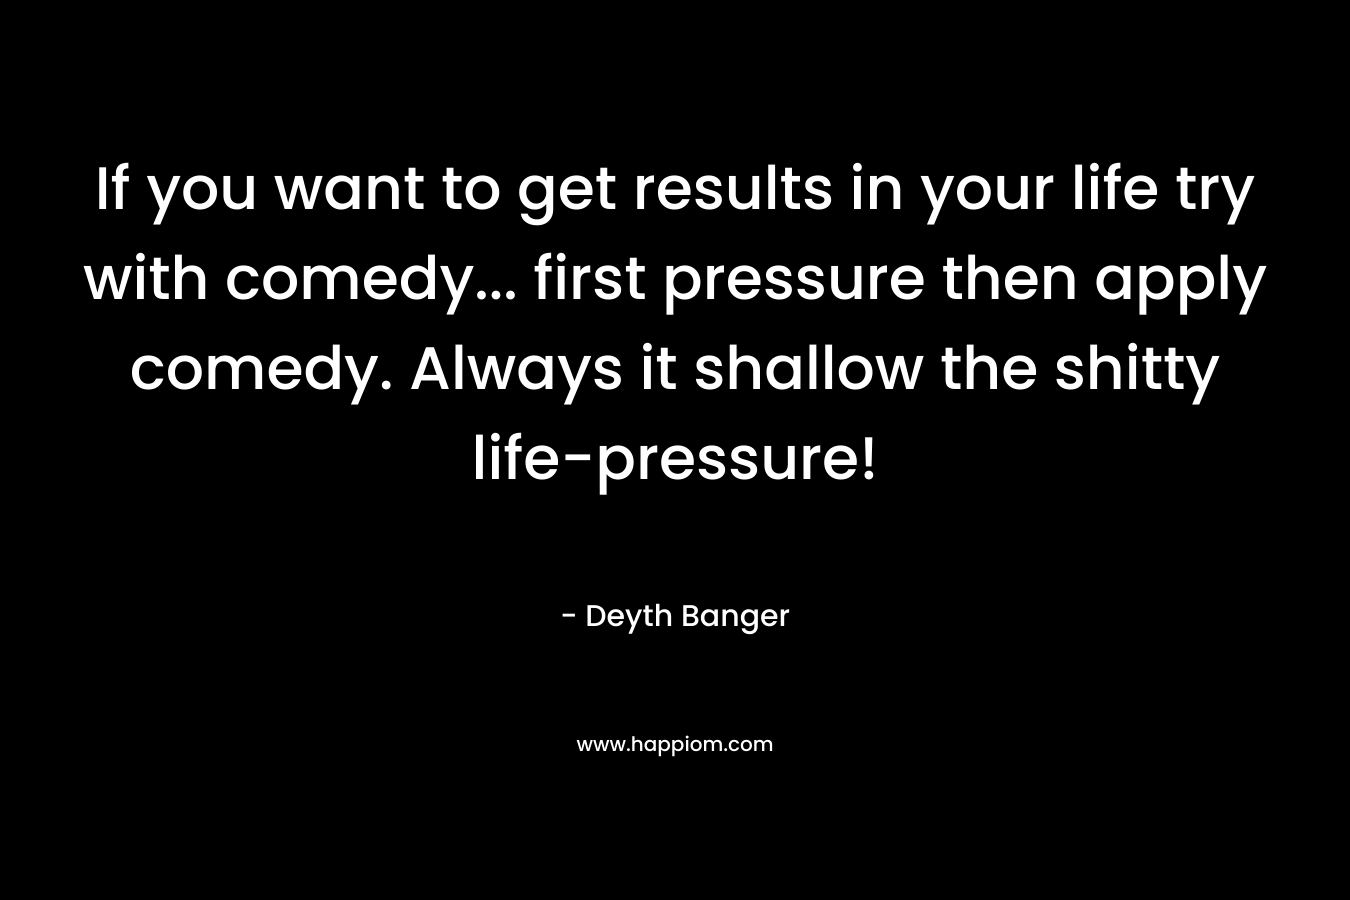 If you want to get results in your life try with comedy... first pressure then apply comedy. Always it shallow the shitty life-pressure!